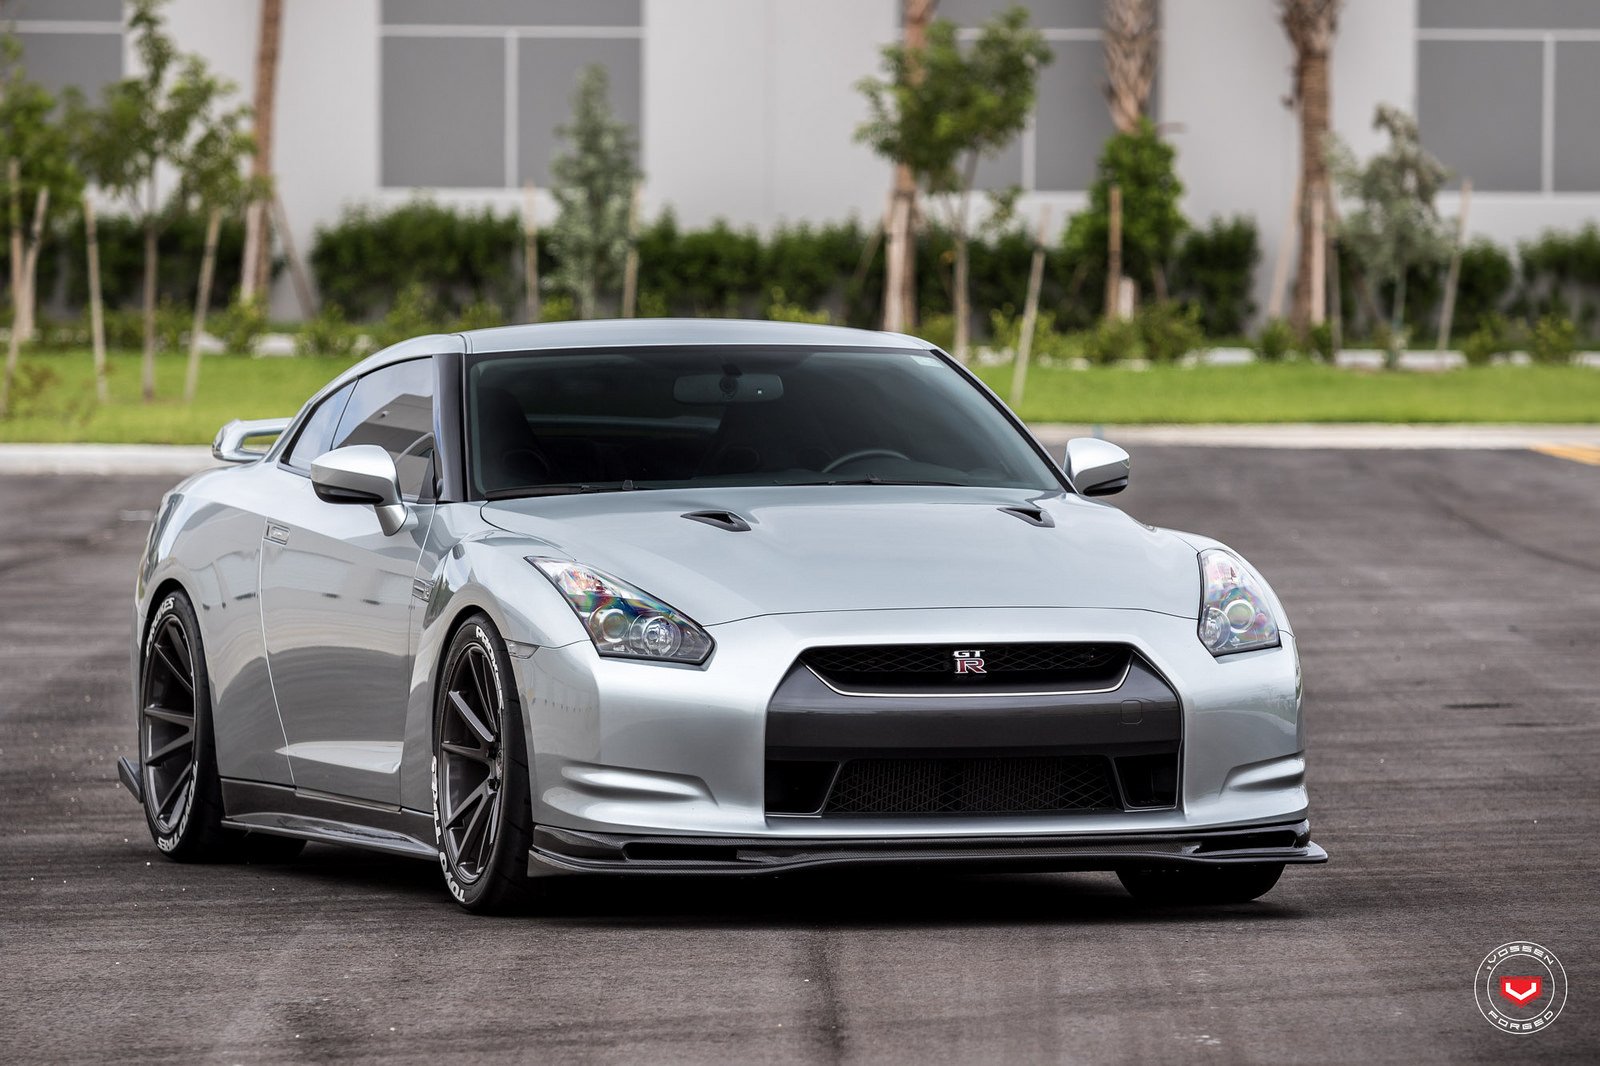 nissan, R35, Gt r, Vossen, Wheels, Cars, Coupe, Godzilla, Silver Wallpapers...